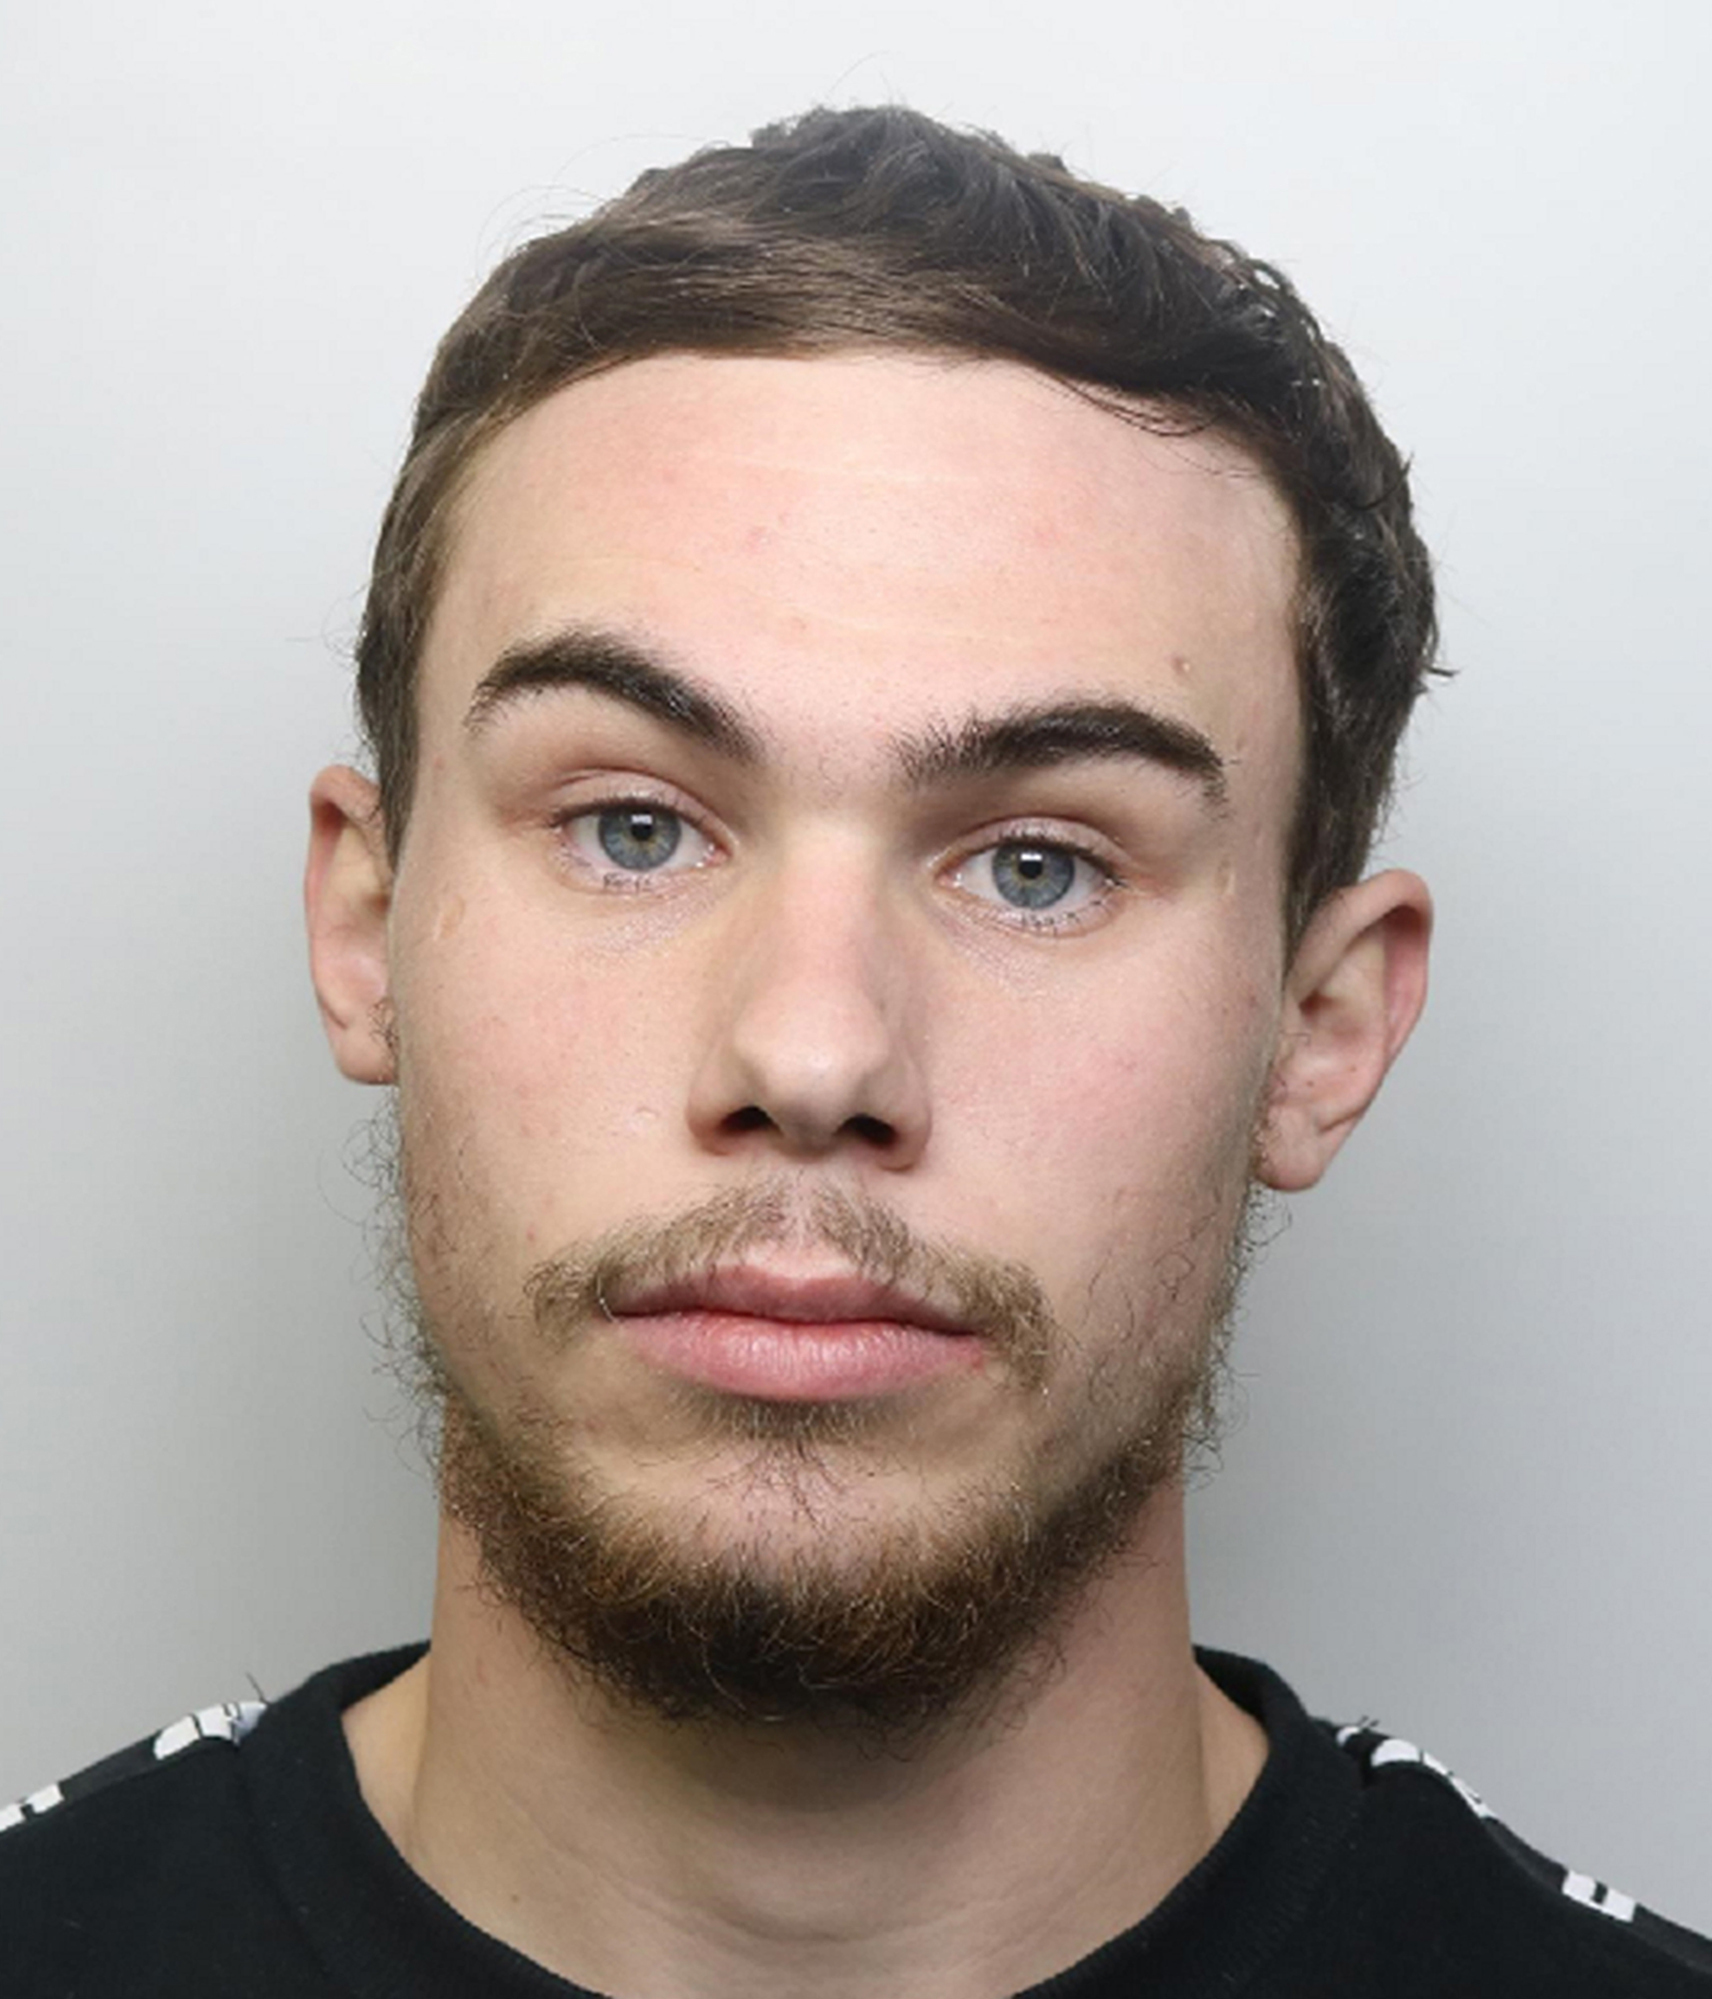 Undated handout photo issued by British Transport Police of Alex Lanning, 22, who has been jailed at the Old Bailey for life with a minimum term of 25 years for the murder of talented athlete Tashan Daniel, who was stabbed at Hillingdon station, west